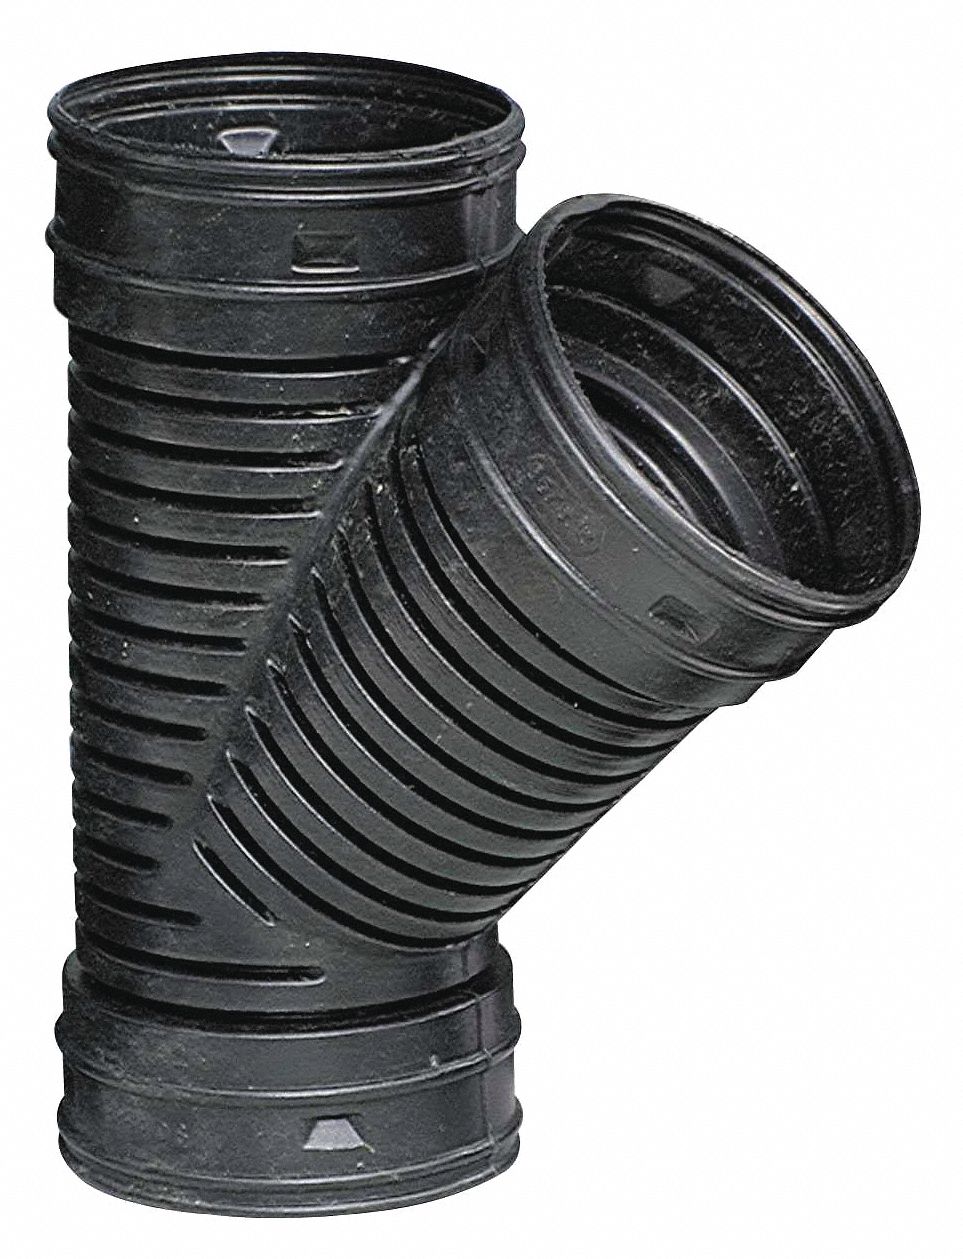 Wye: 3 in x 3 in x 3 in Fitting Pipe Size, Single, Snap Lock, 10 13/16 in Overall Lg, Schedule 80